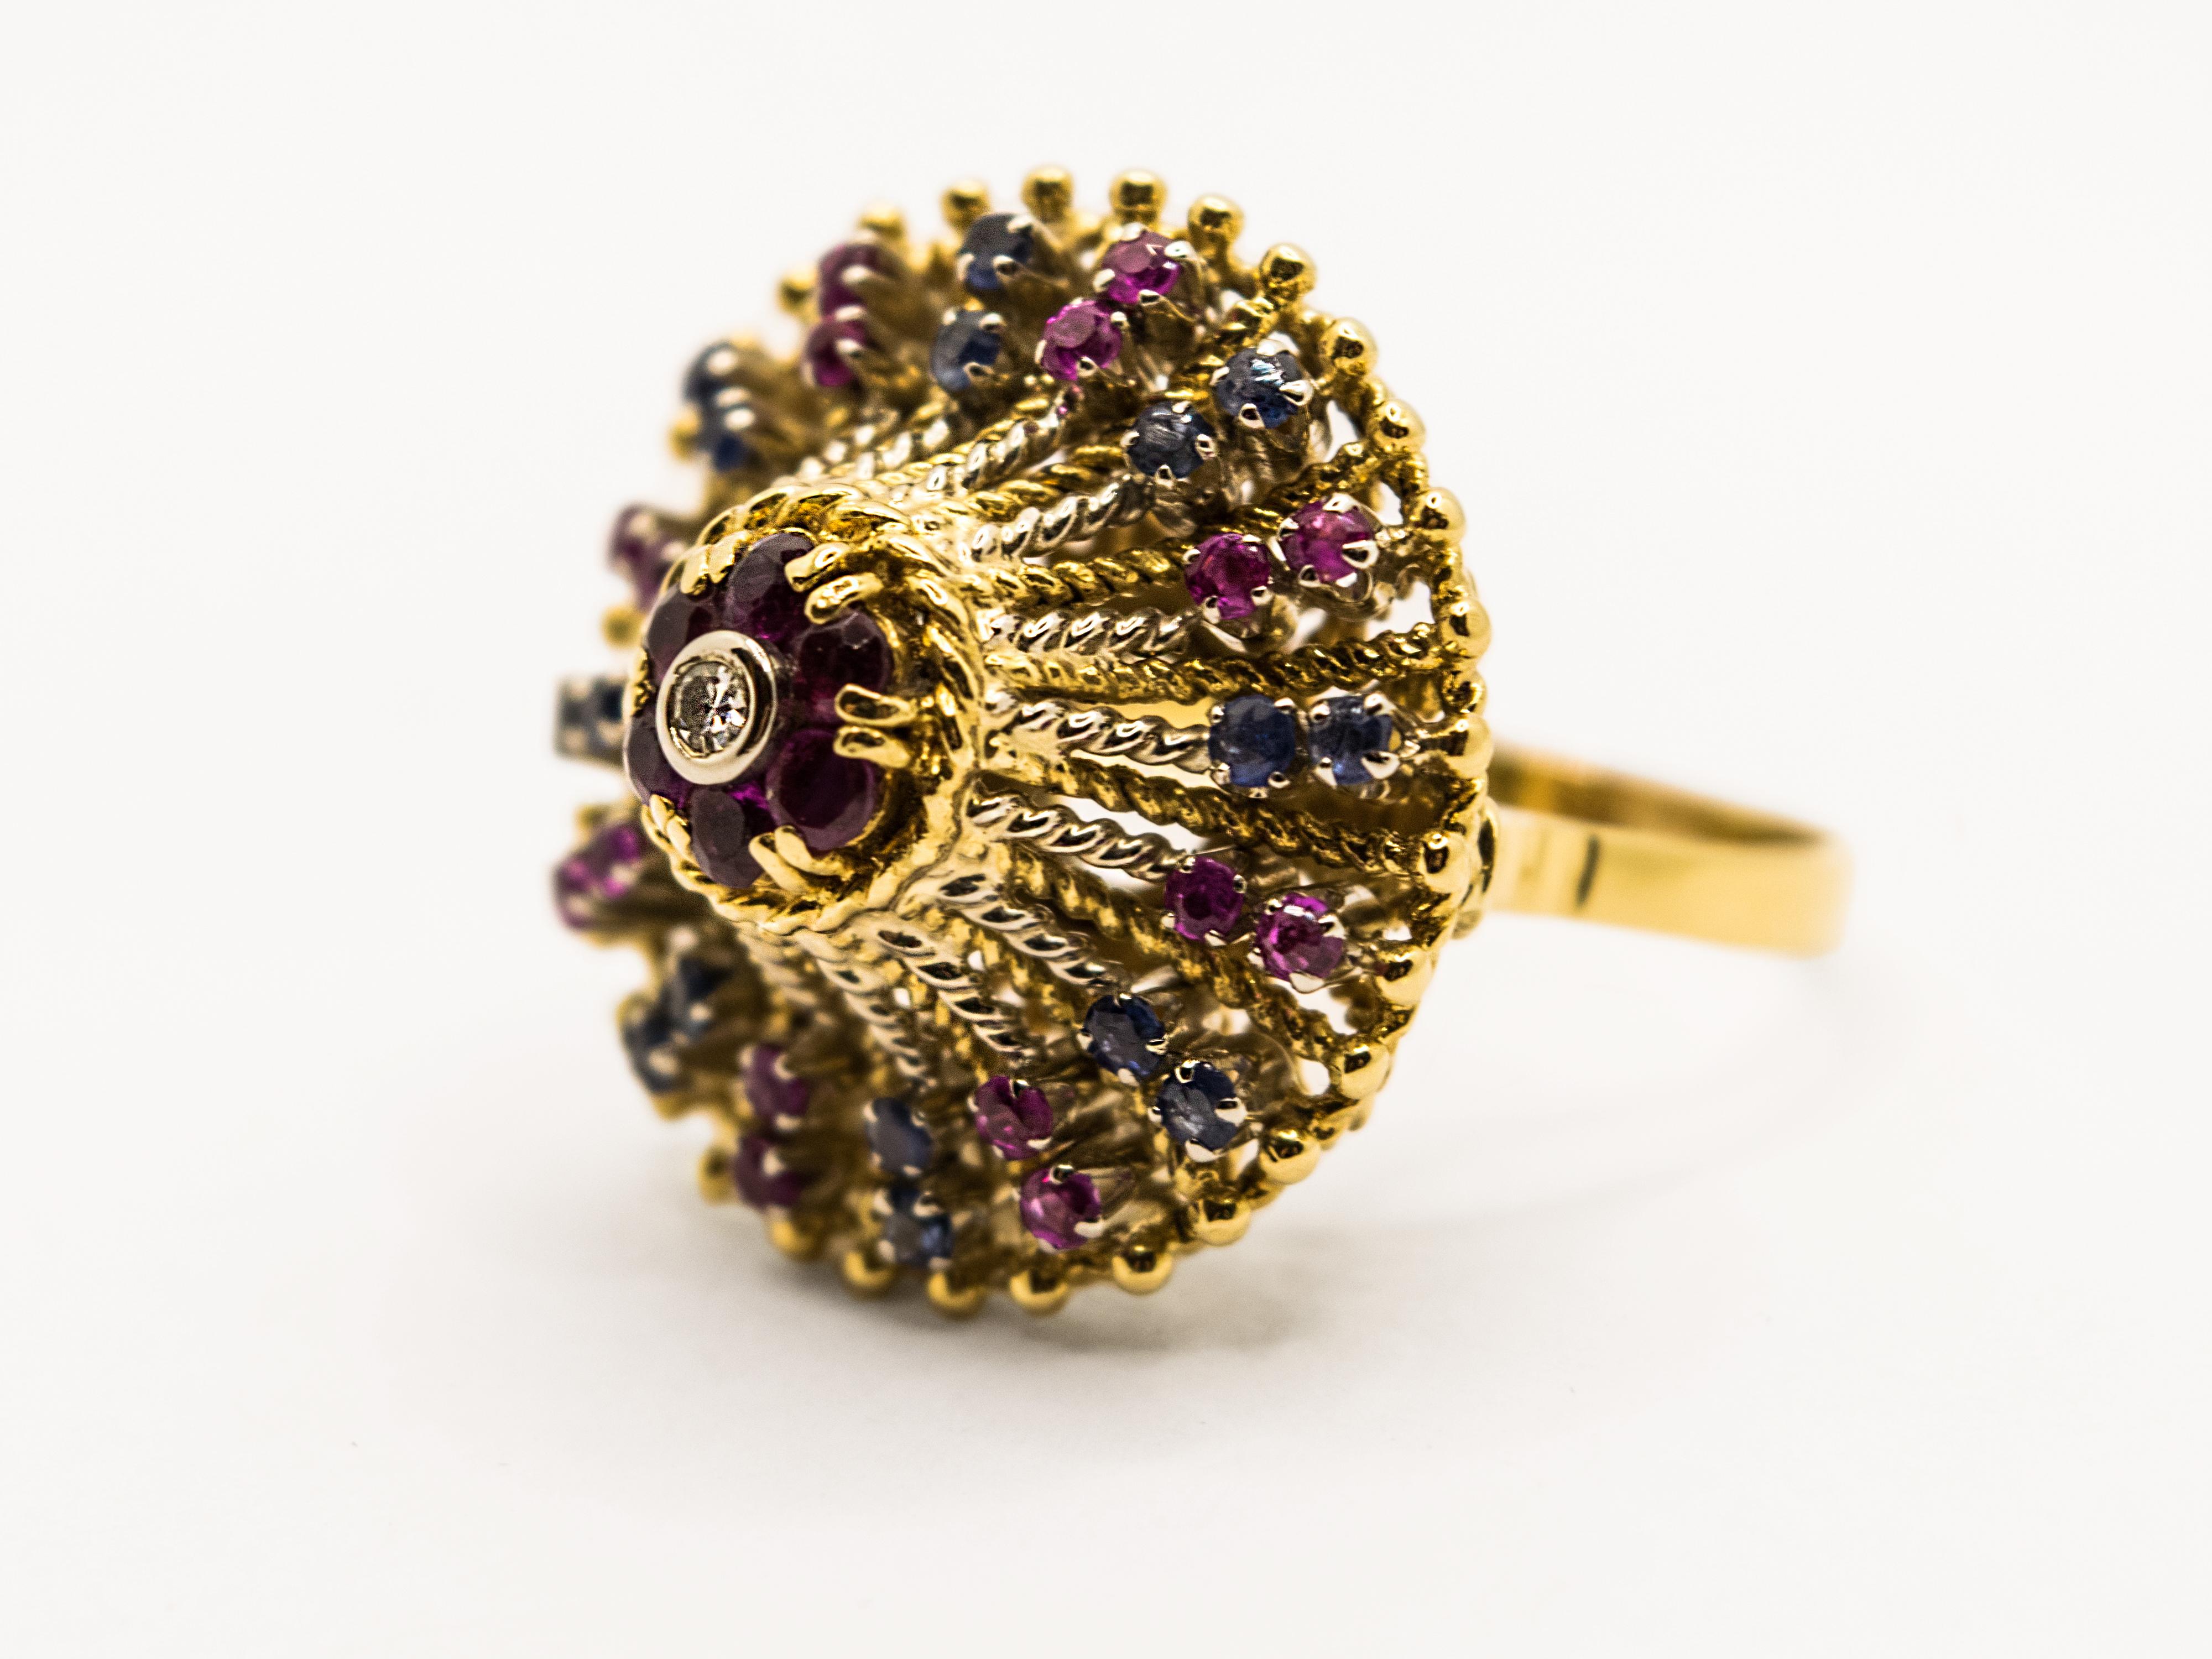 Vintage cocktail ring ( circa 1950s to 1960s ) set with a cluster of blue sapphires and rubies in a high rising dome mount and one diamond at the top.
Crafted in 18 Kt yellow gold with a romantic woven pattern.
This ring is in excellent original